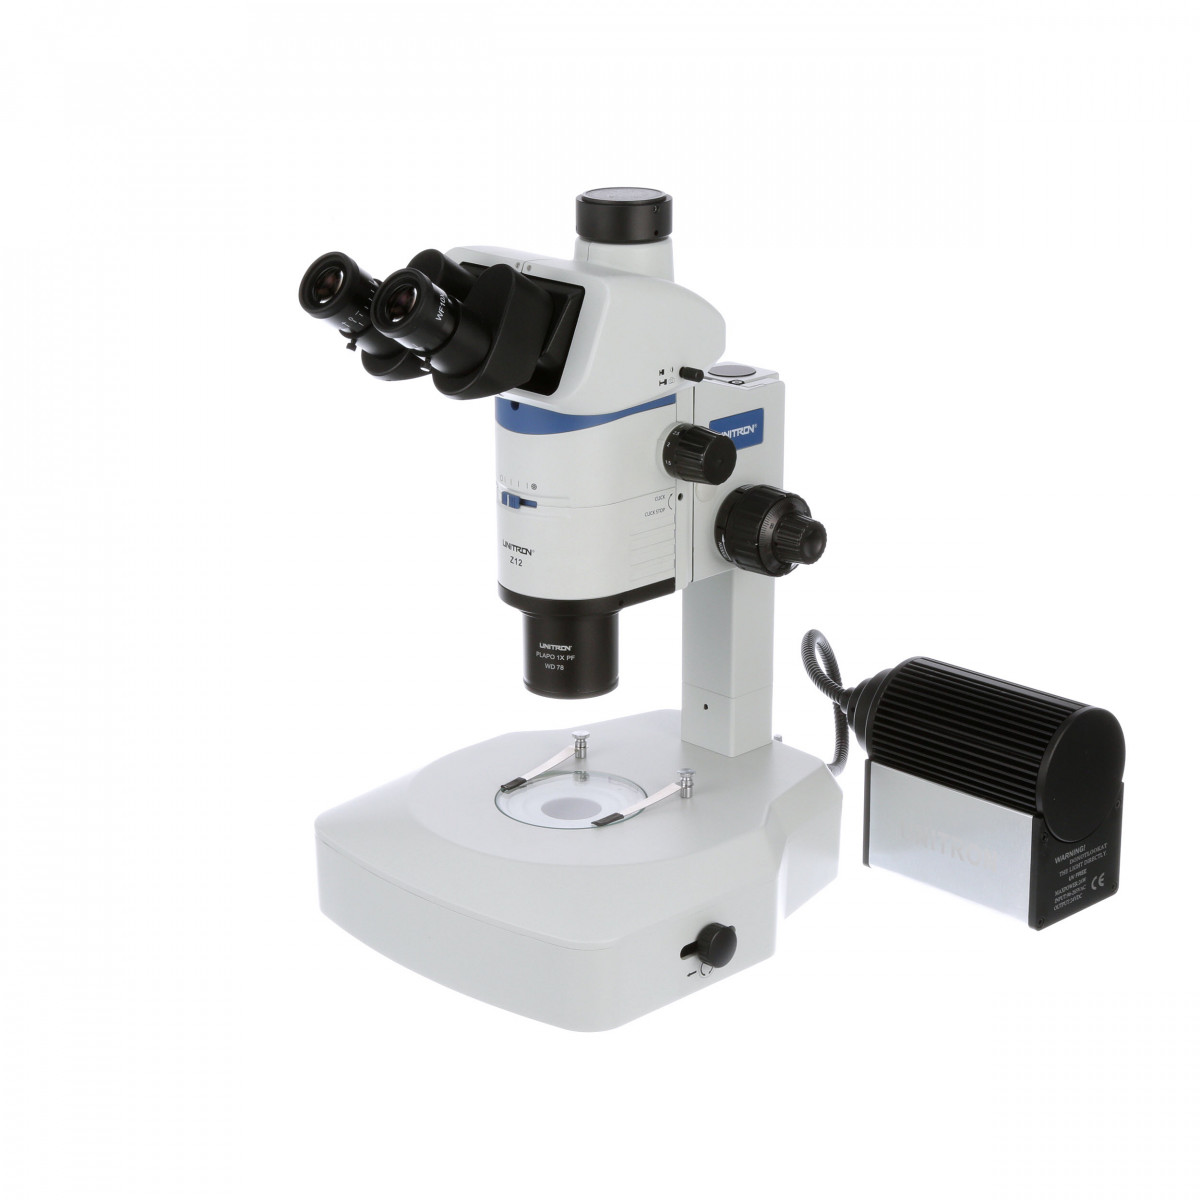 Diascopic stand shown with Z12 stereo microscope, Z12 focus mount, light source and fiber light guide (all optional)